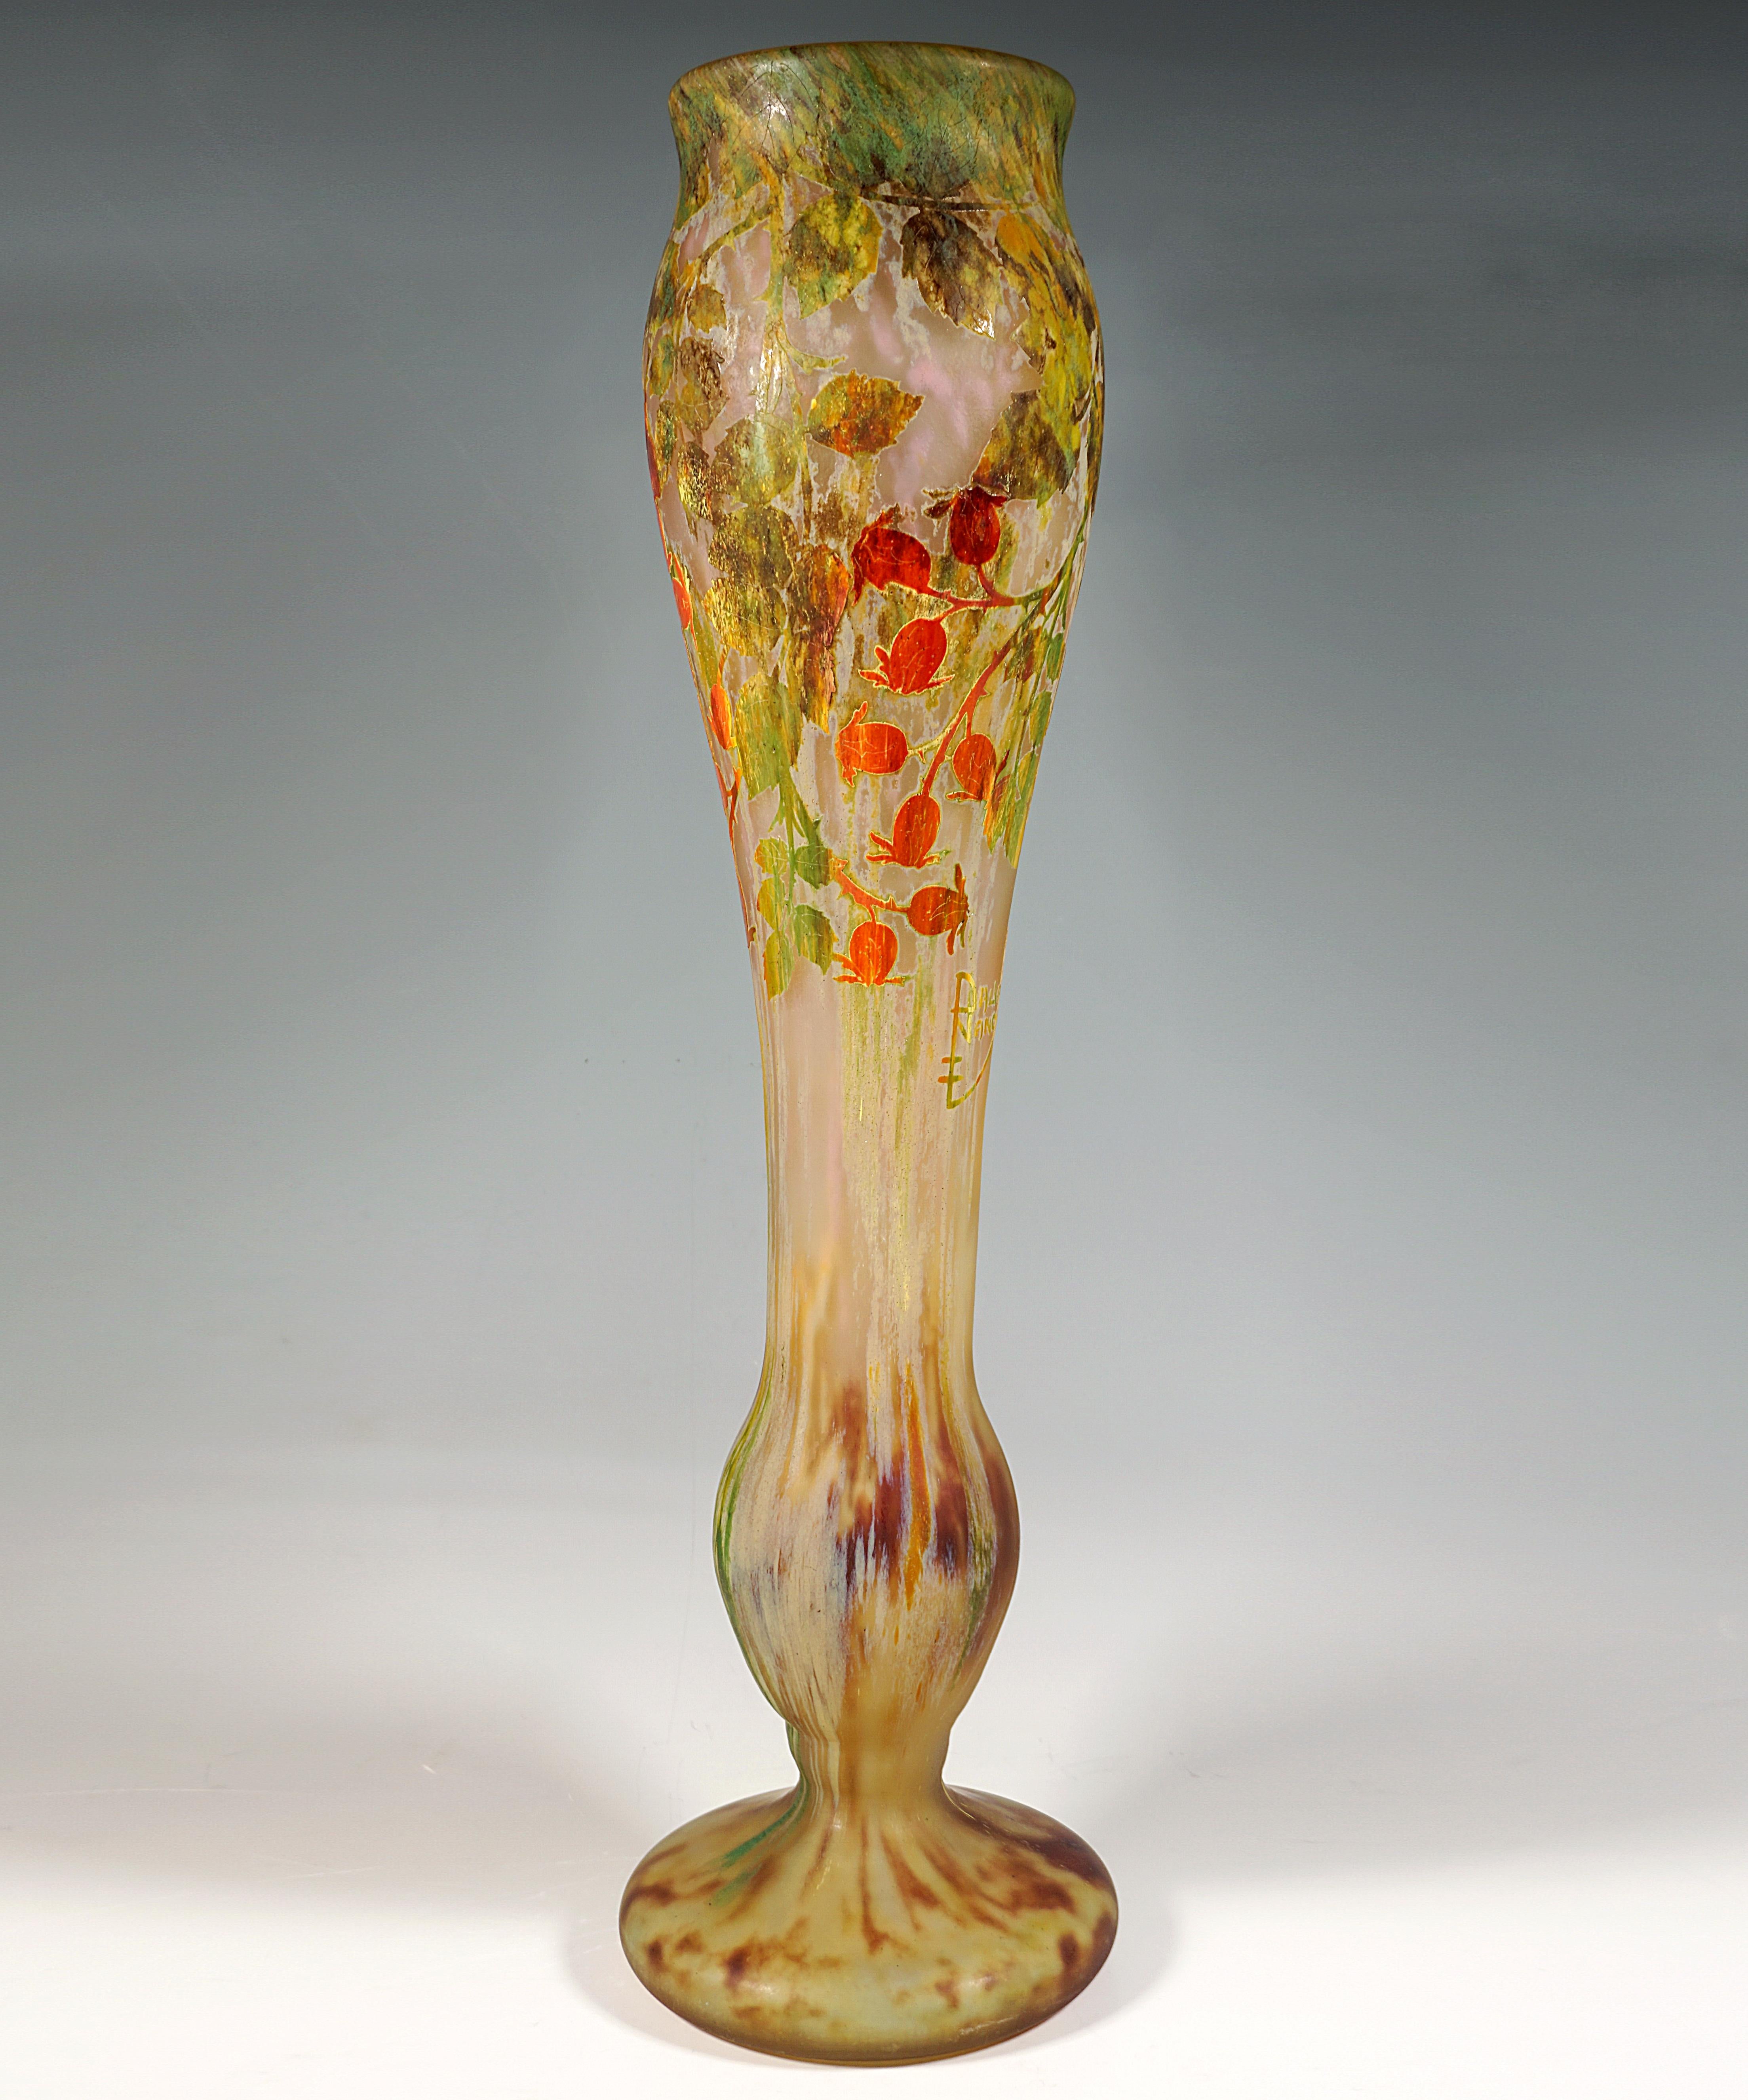 Large baluster vase on a separate foot, colorless glass with flaky white, yellow-green and brown colored powder inclusions, overlay in yellow, orange-red, green and brown, rosehip decoration etched in several stages, satin-finished surface in the